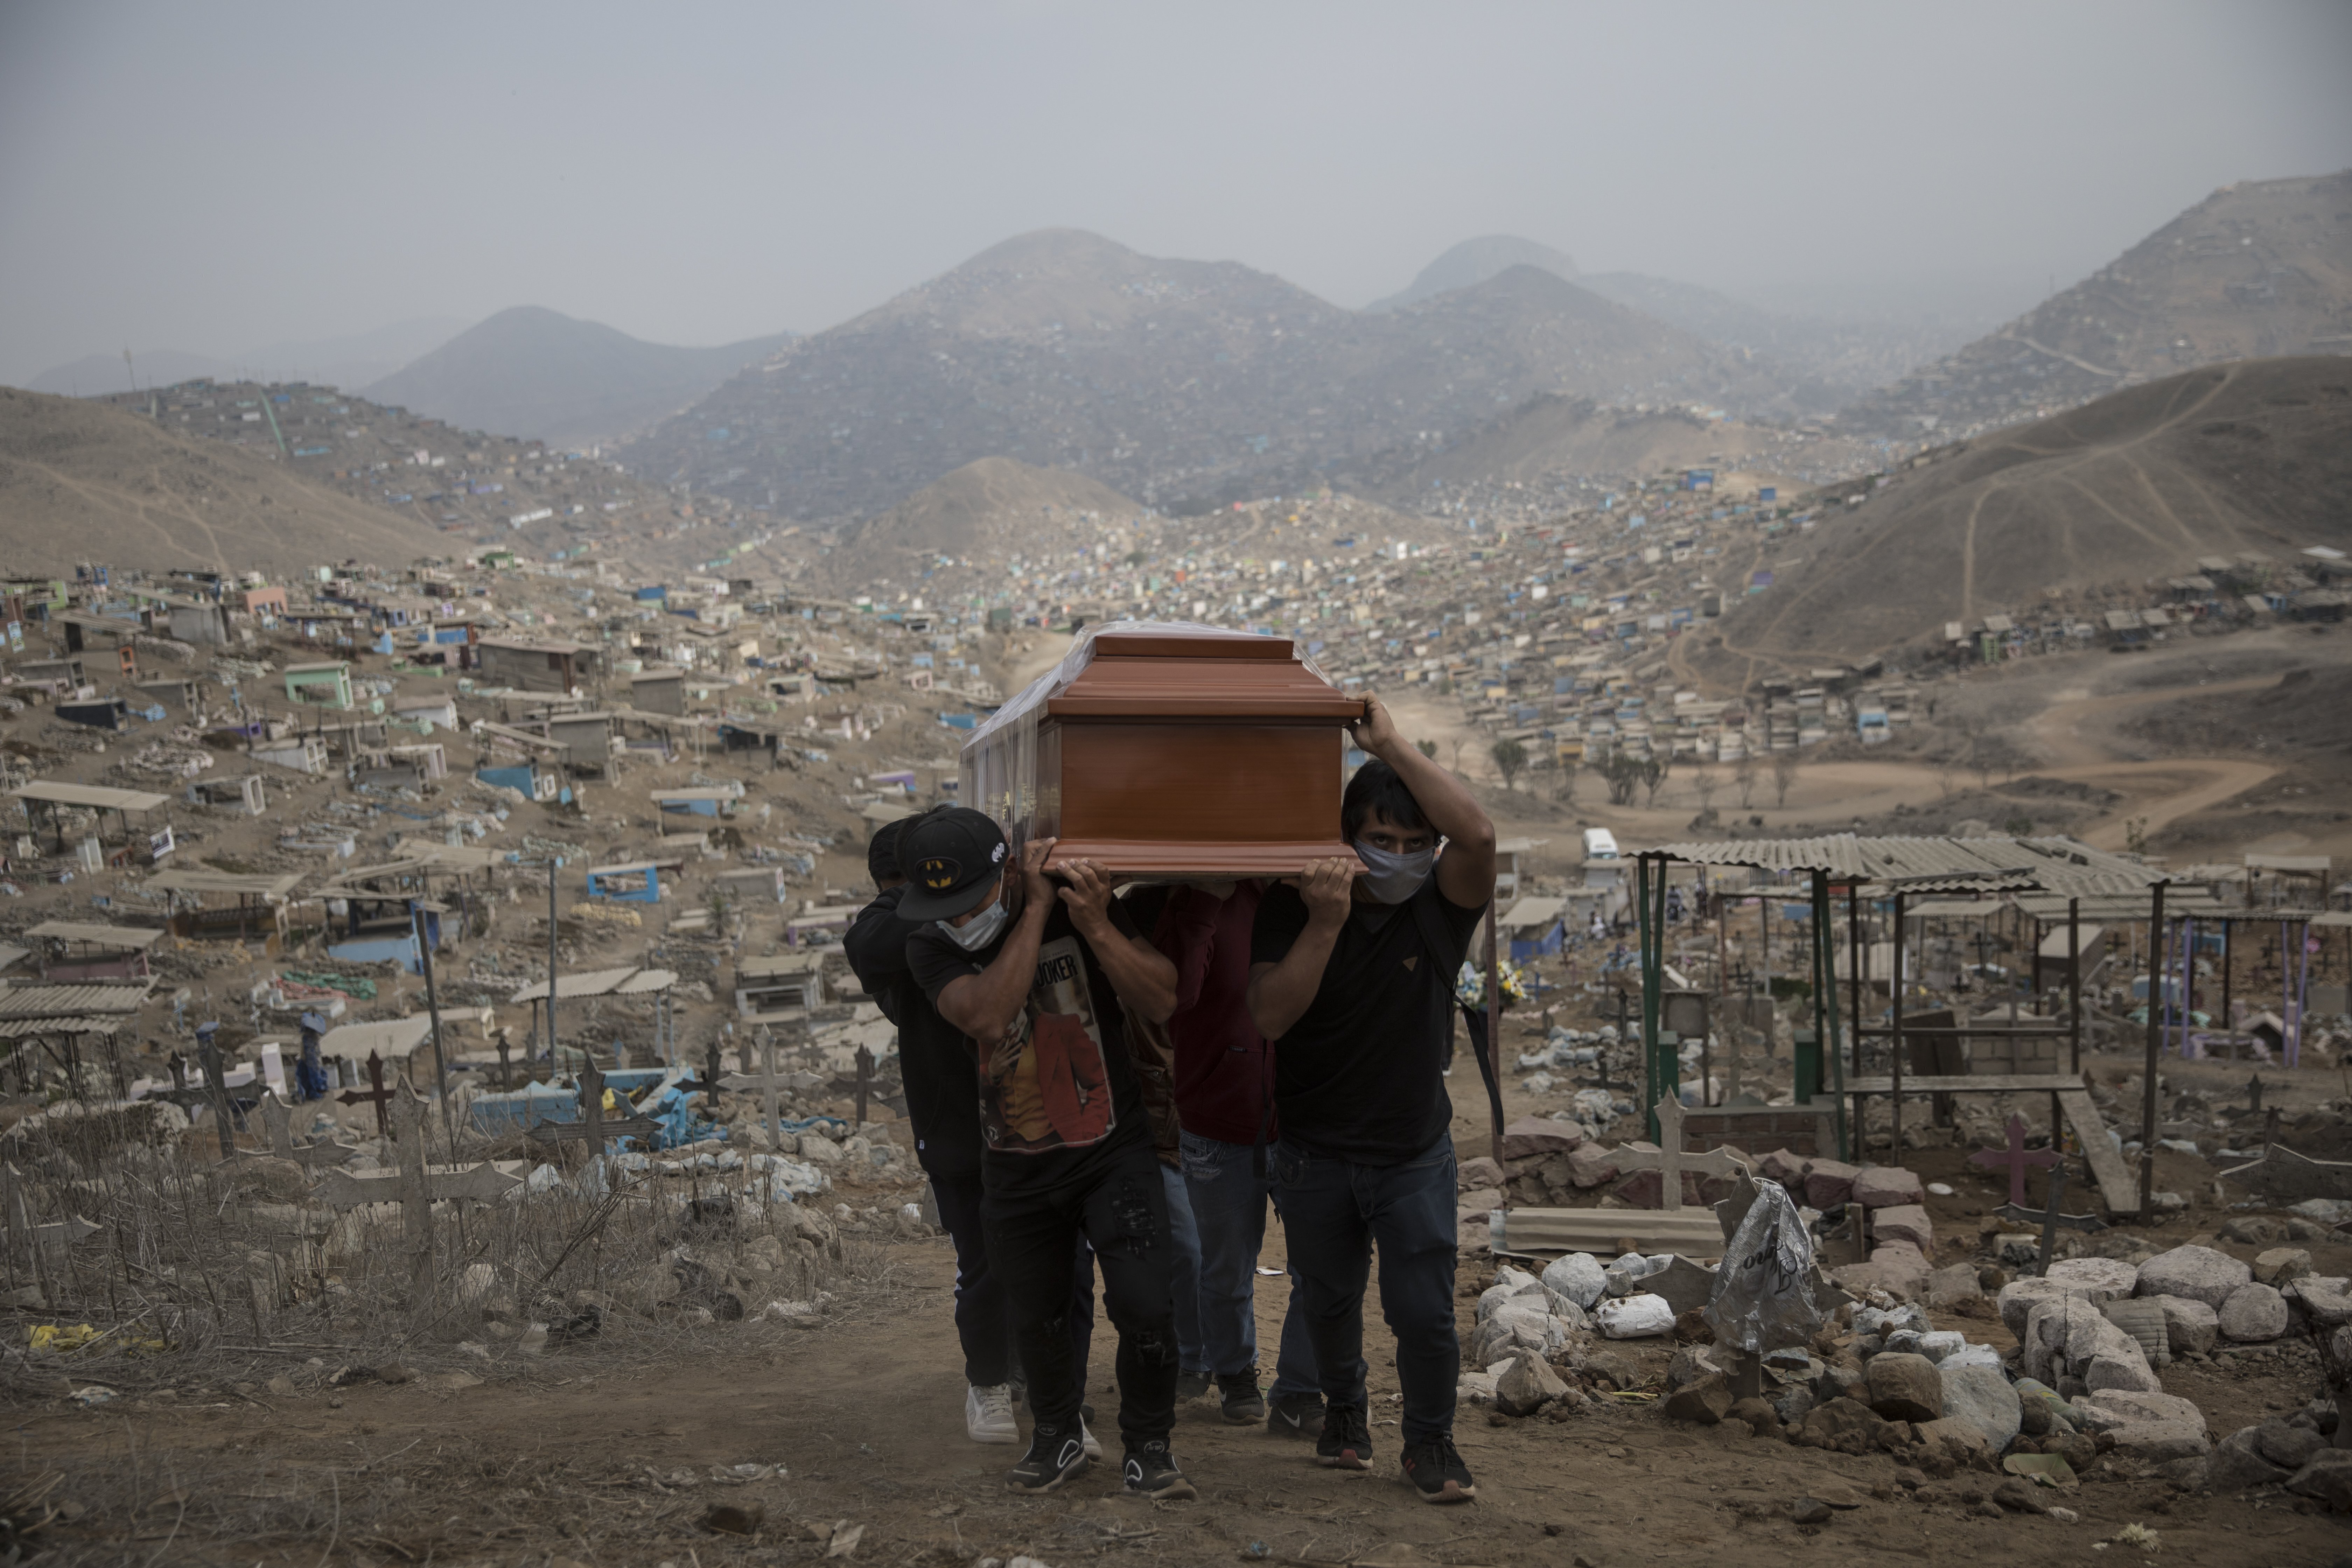 Relatives carry the coffin of a suspected Covid-19 victim at the Nueva Esperanza cemetery on the outskirts of Lima, Peru, on May 28.